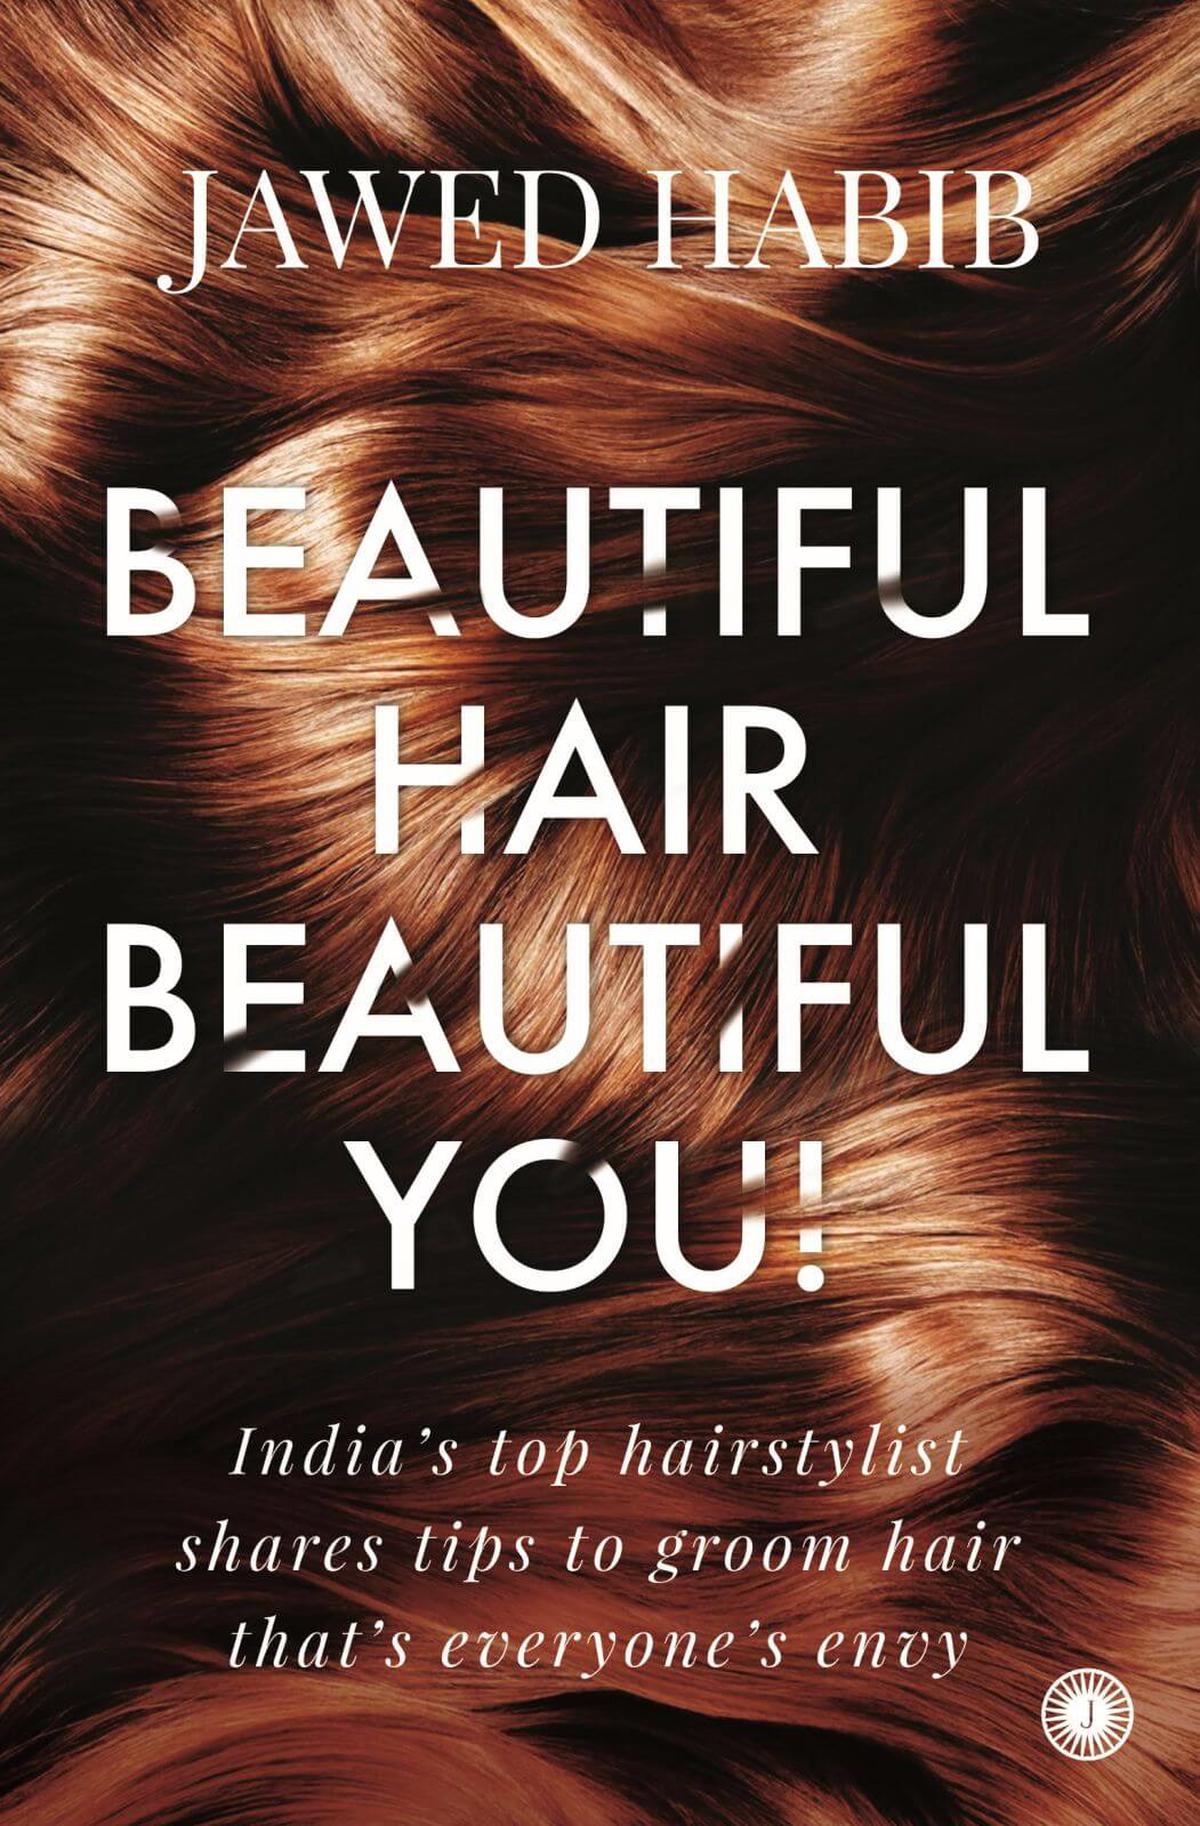 ‘Beautiful Hair, Beautiful You’ by Jawed Habib, published by Jaico Books.